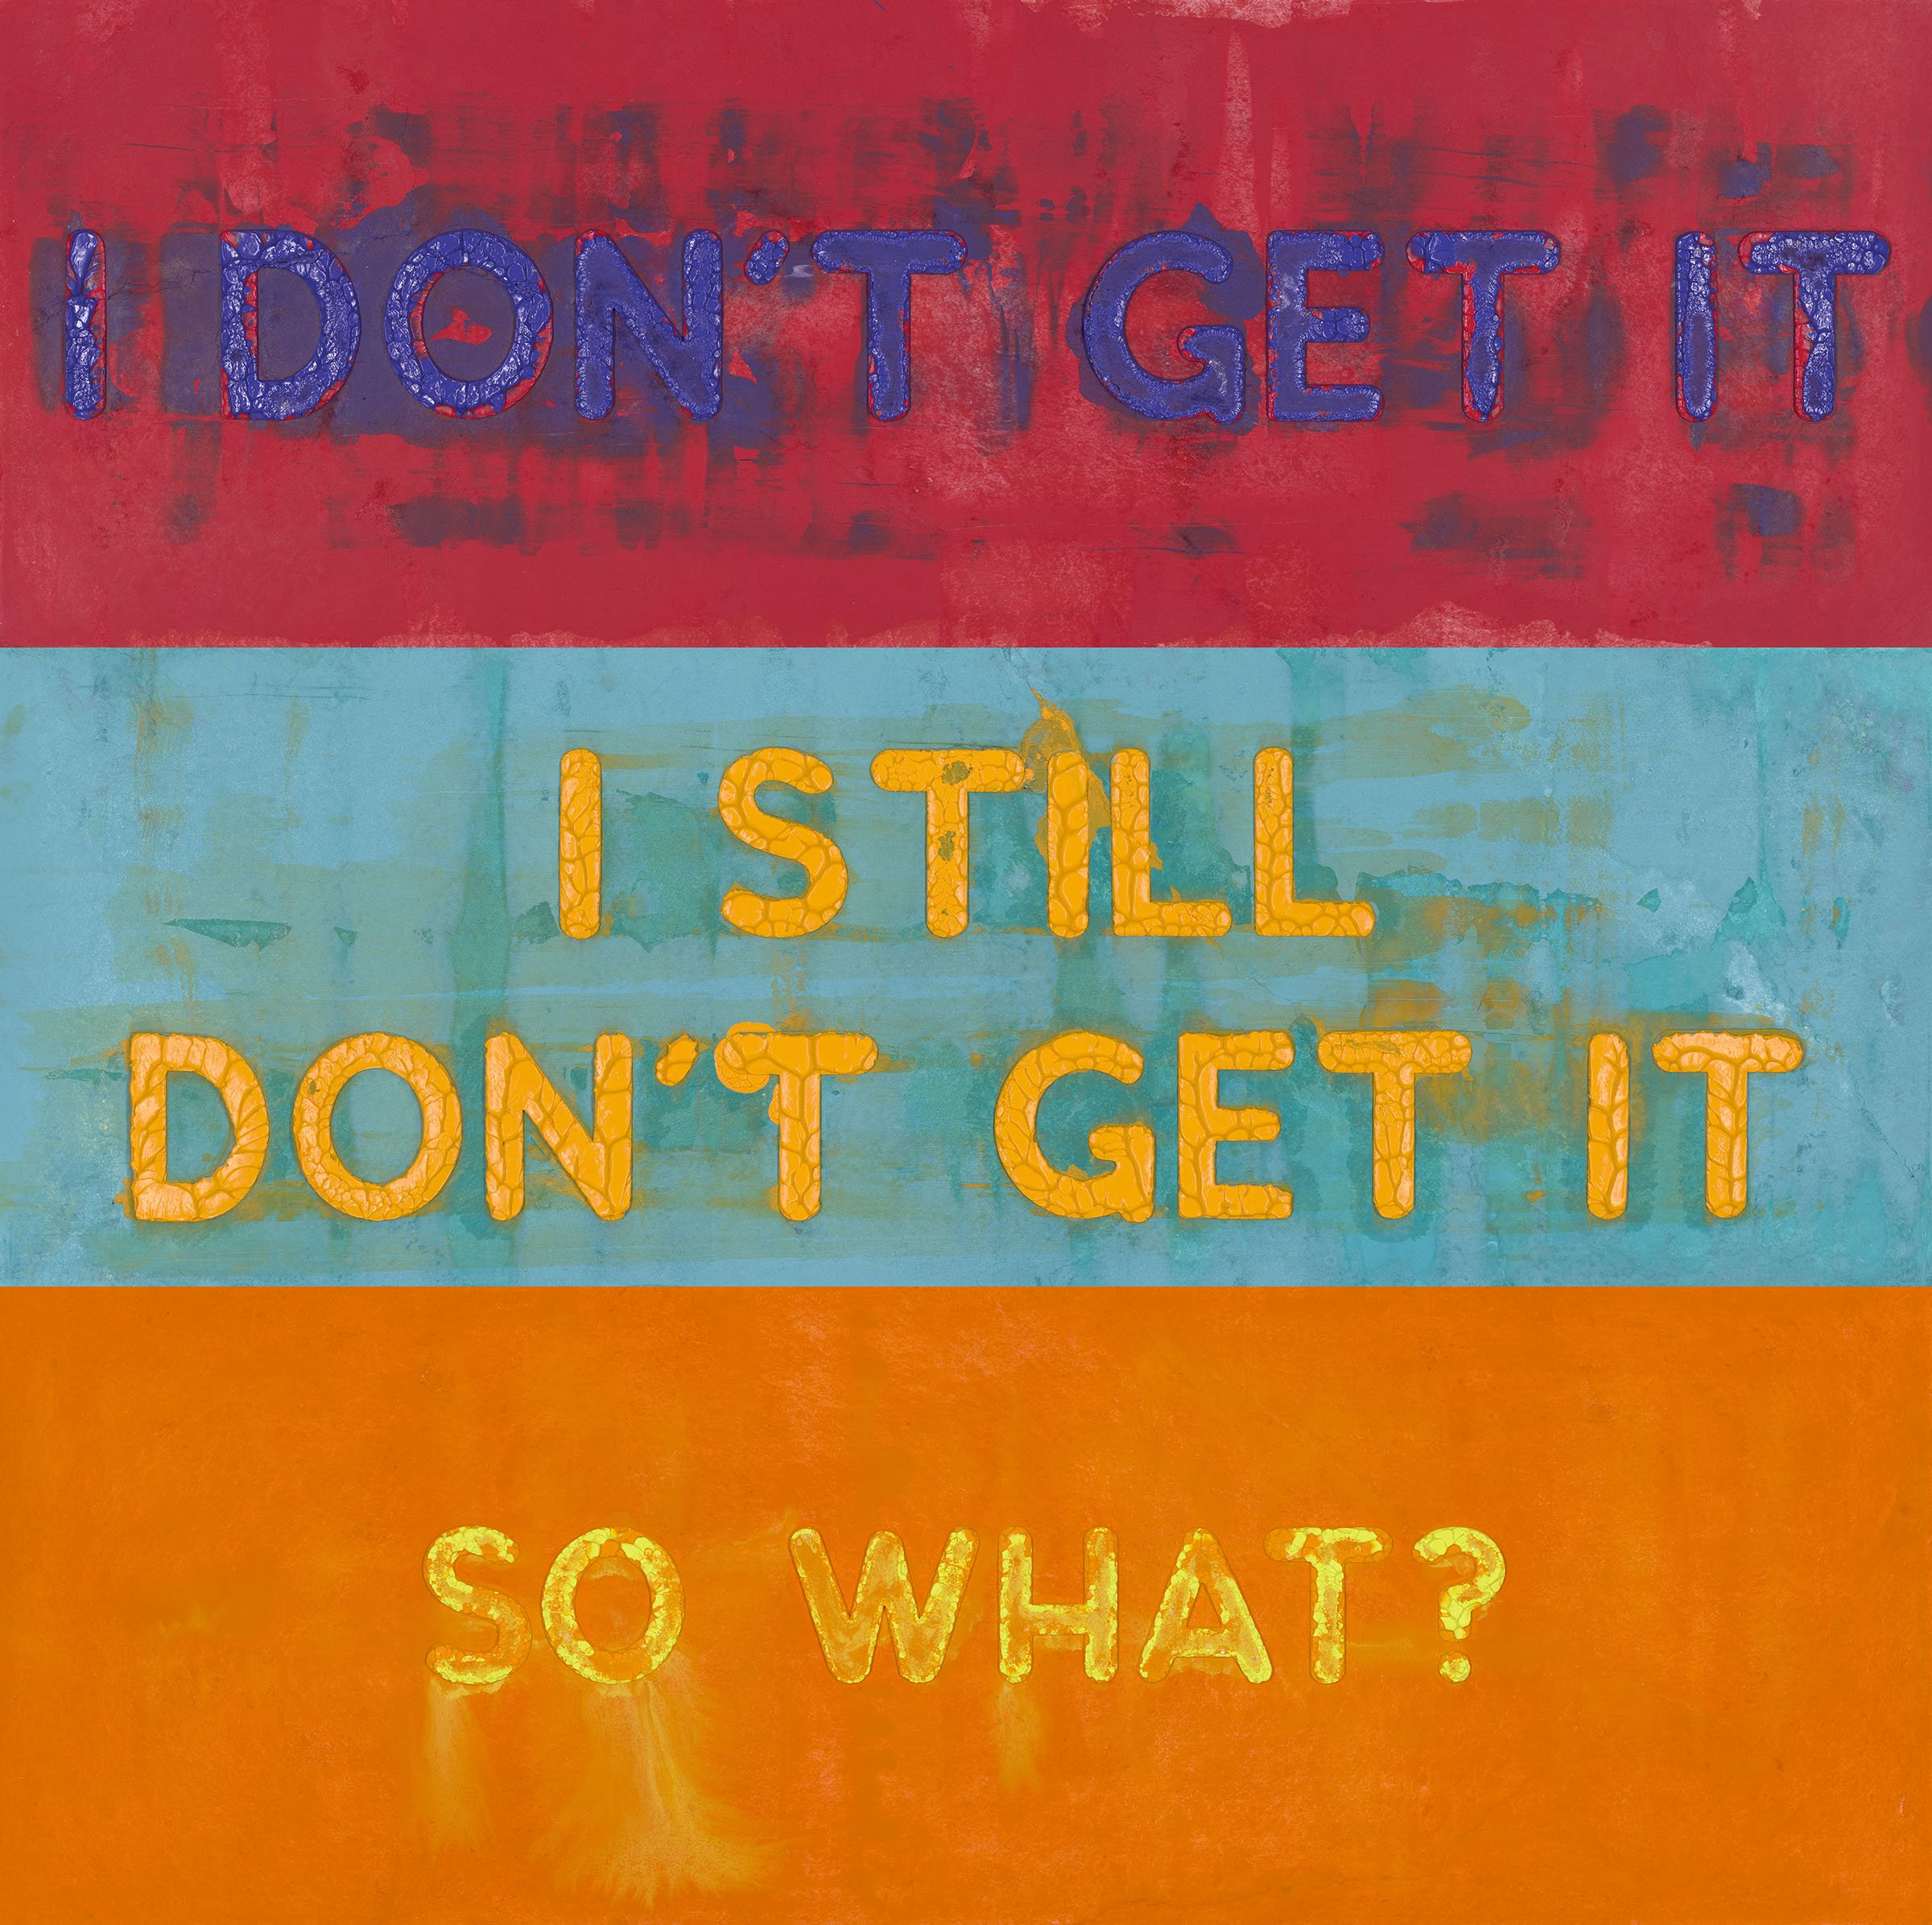   I Don't Get It/I Still Don't Get It/So What? , 2021 oil on handmade paper in three parts 60 × 60 inches (152.40 × 152.40 cm) 